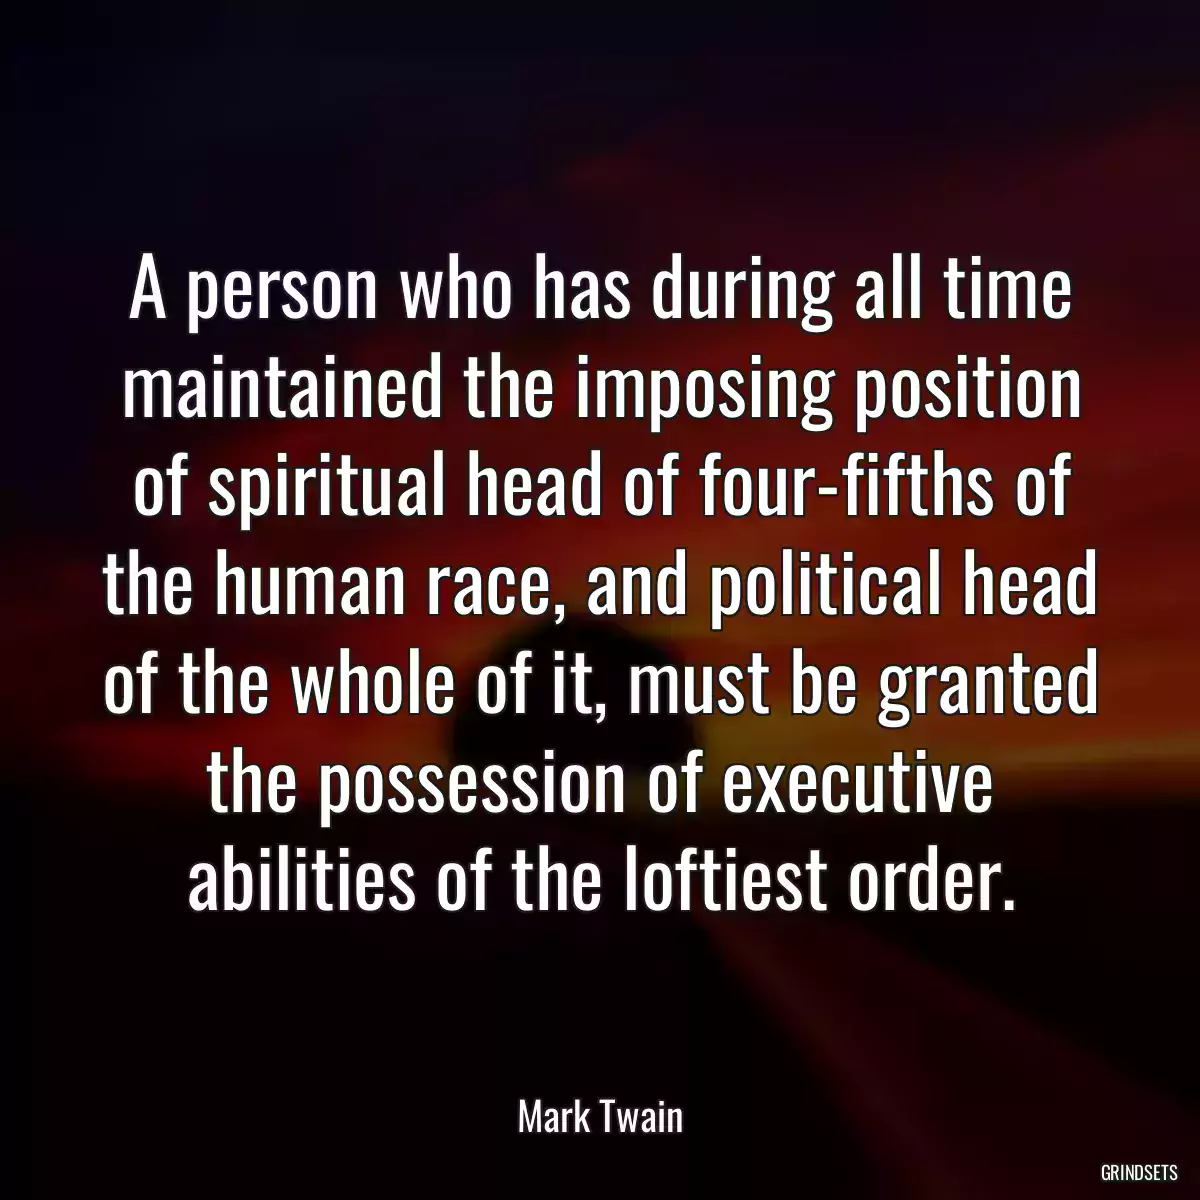 A person who has during all time maintained the imposing position of spiritual head of four-fifths of the human race, and political head of the whole of it, must be granted the possession of executive abilities of the loftiest order.